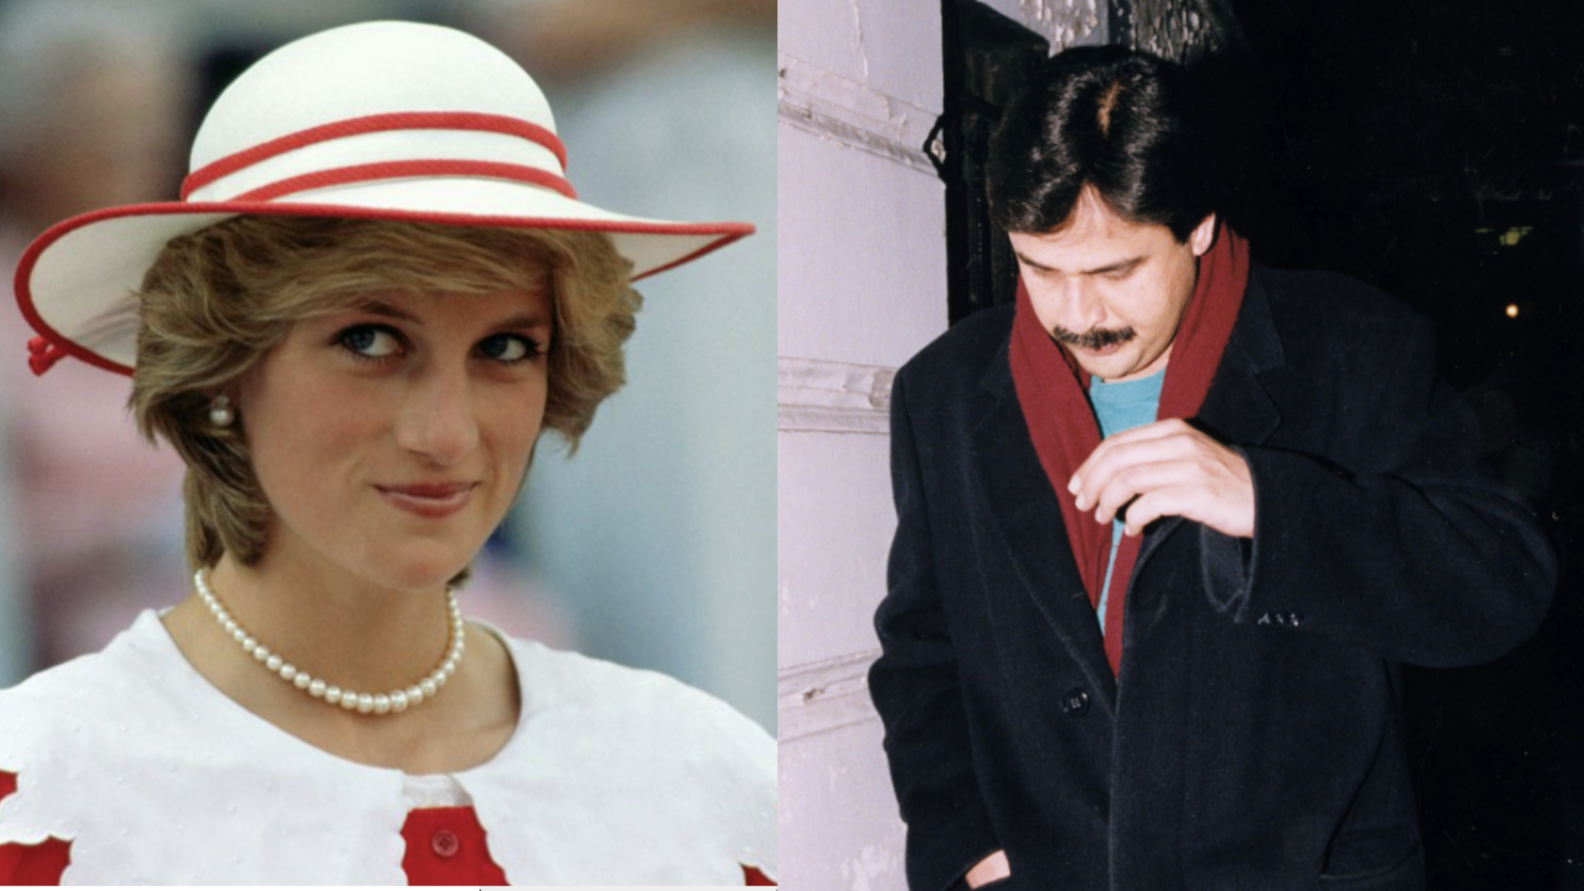 Lobna Khansex - Princess Diana and Hasnat Khan's Relationship Timeline and Details